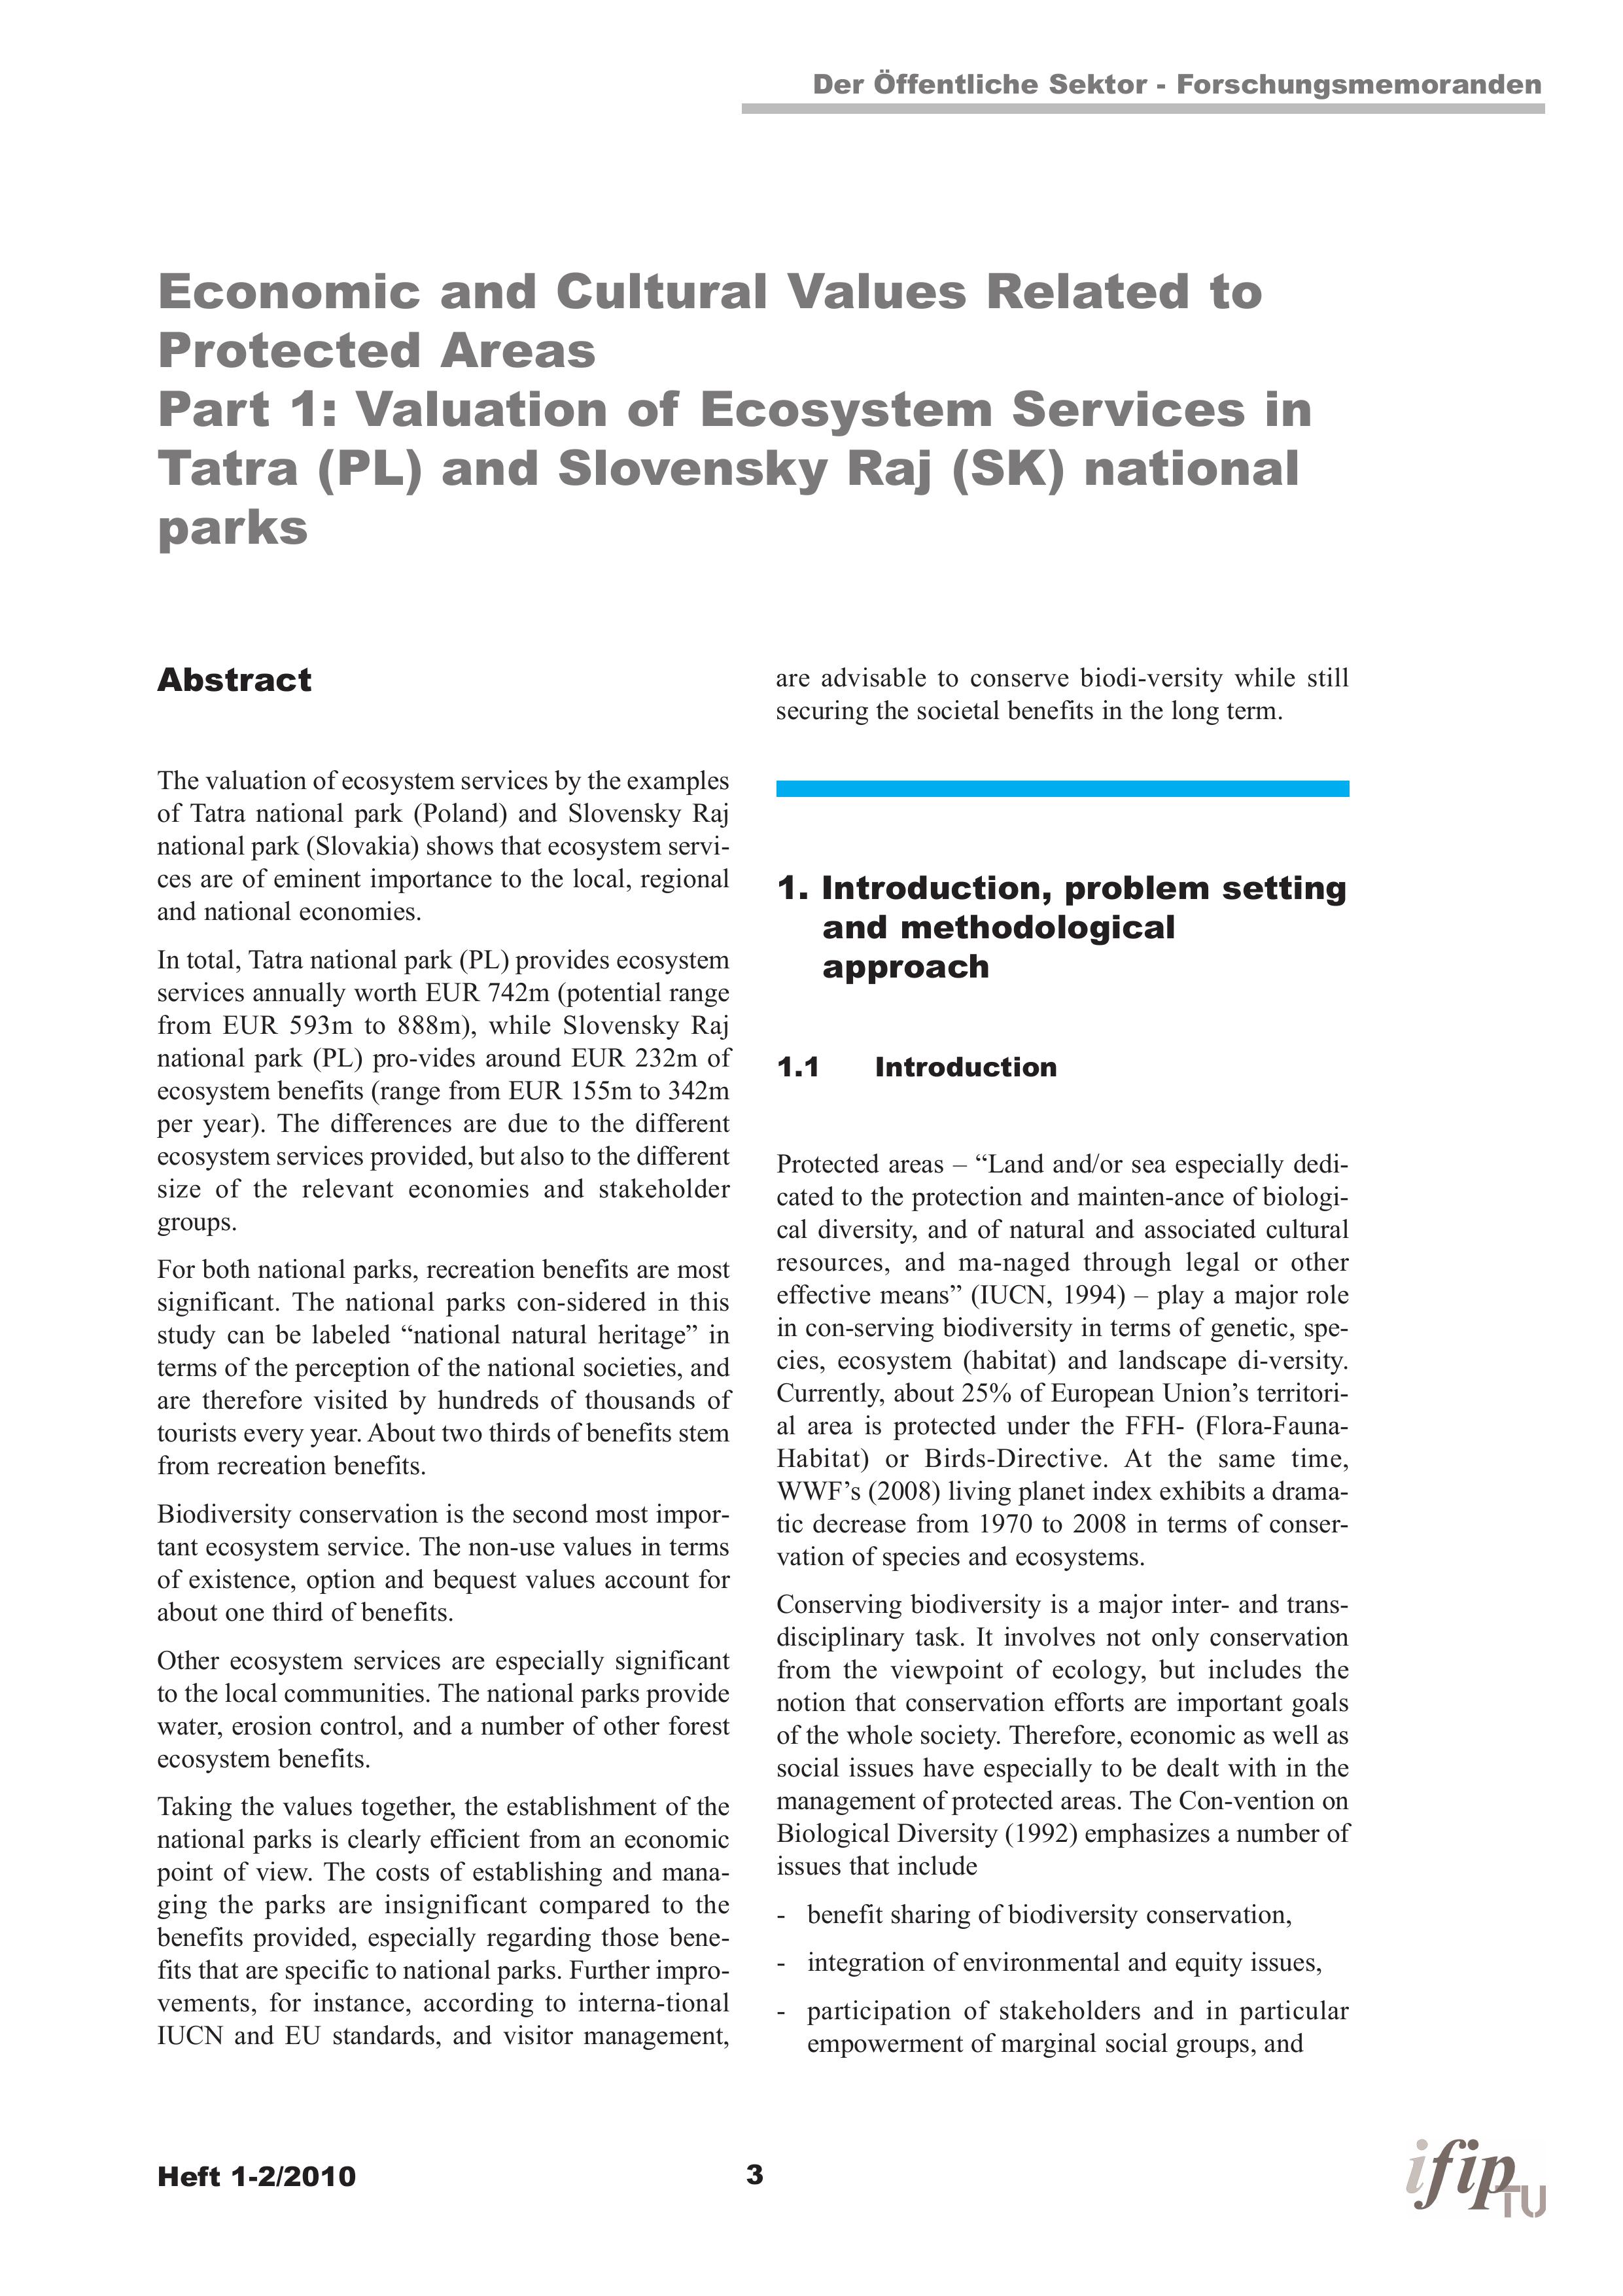 Economic and cultural values related to Protected Areas - Part 1: Valuation of Ecosystem Services in Tatra (PL) and Slovensky Raj (SK) national parks